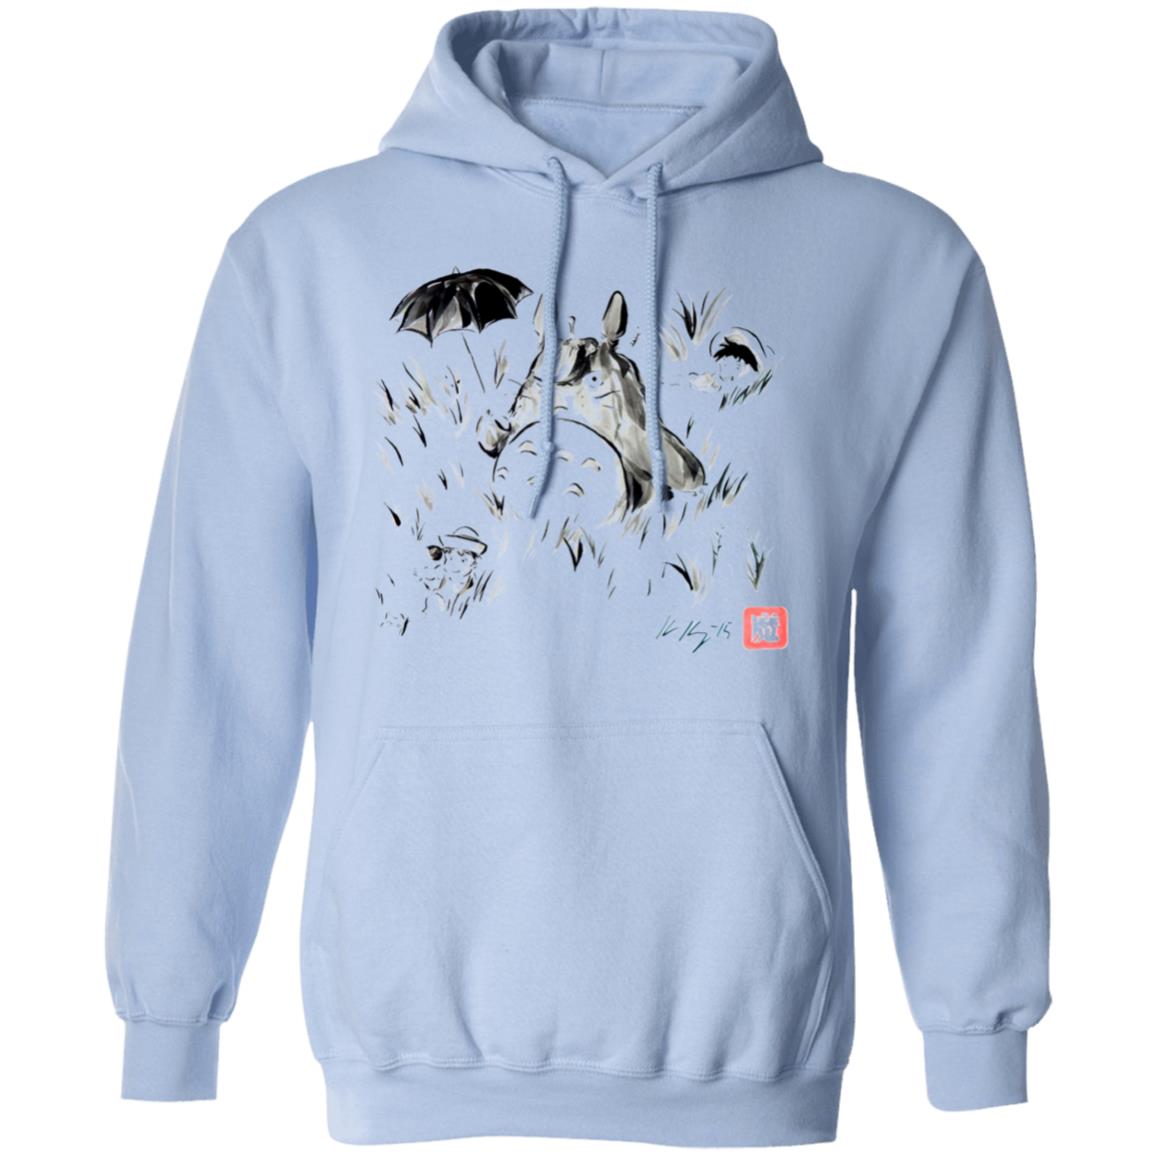 Totoro And The Girls Ink Painting Hoodie